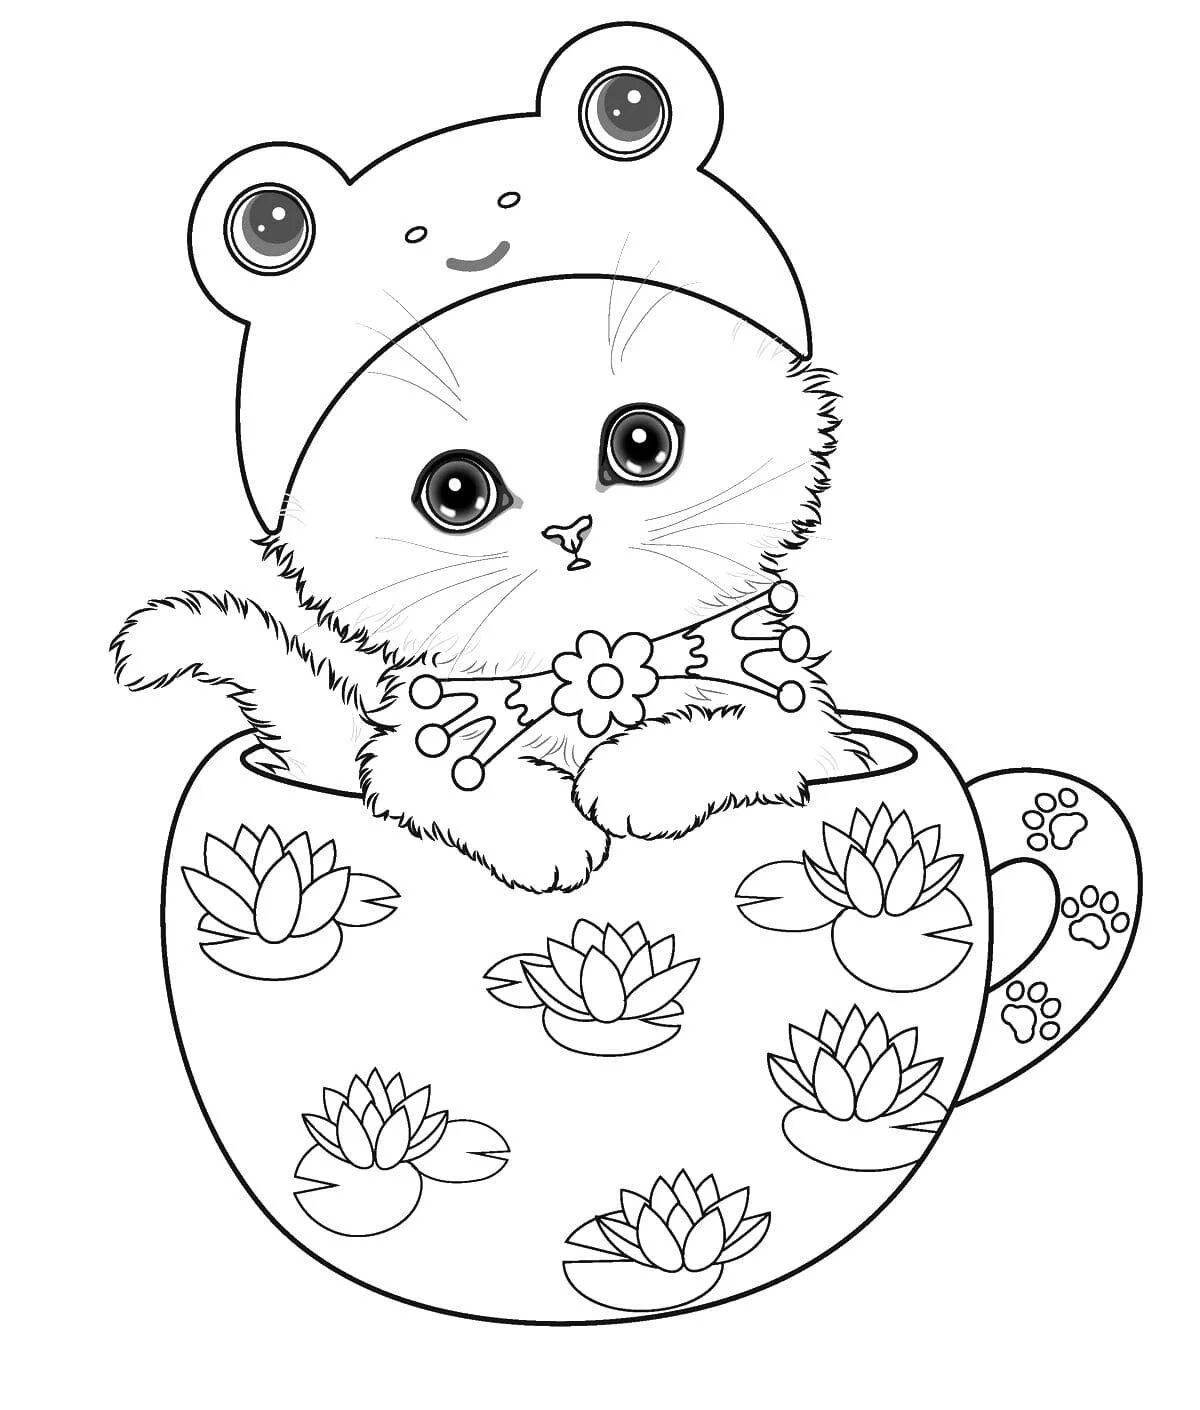 Fancy cat in a mug coloring page